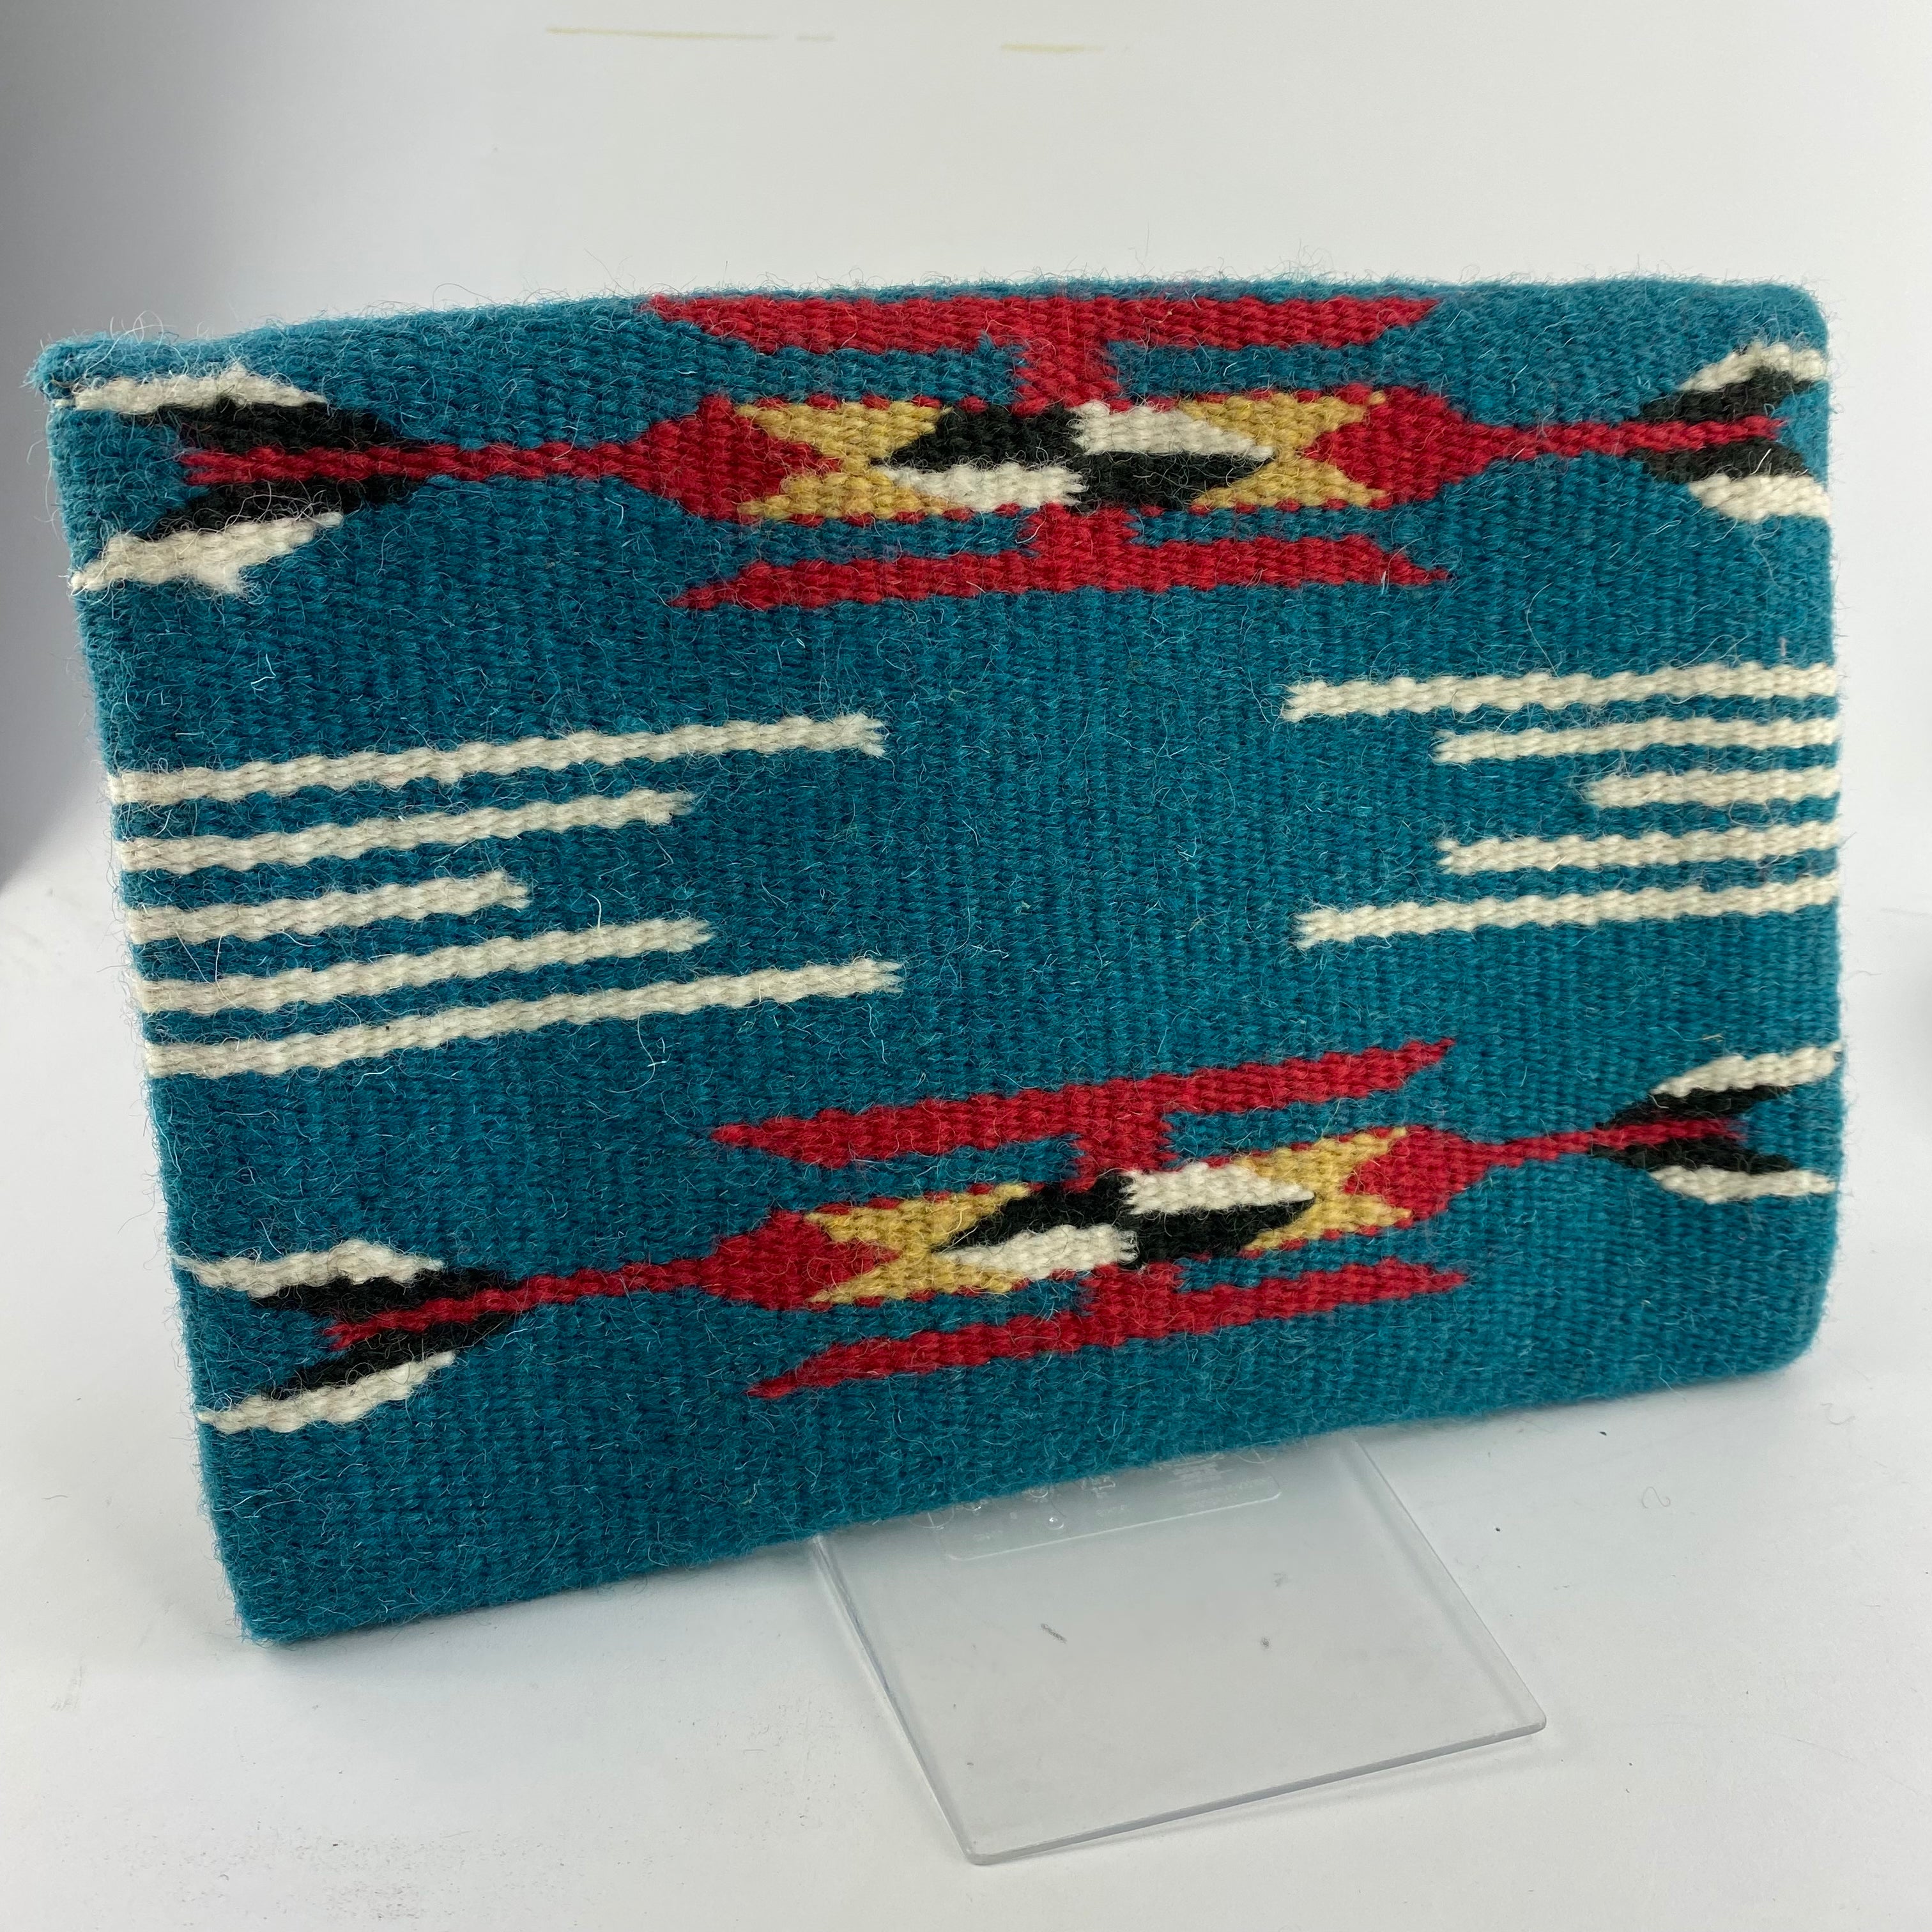 Wander Clutch - Turquoise